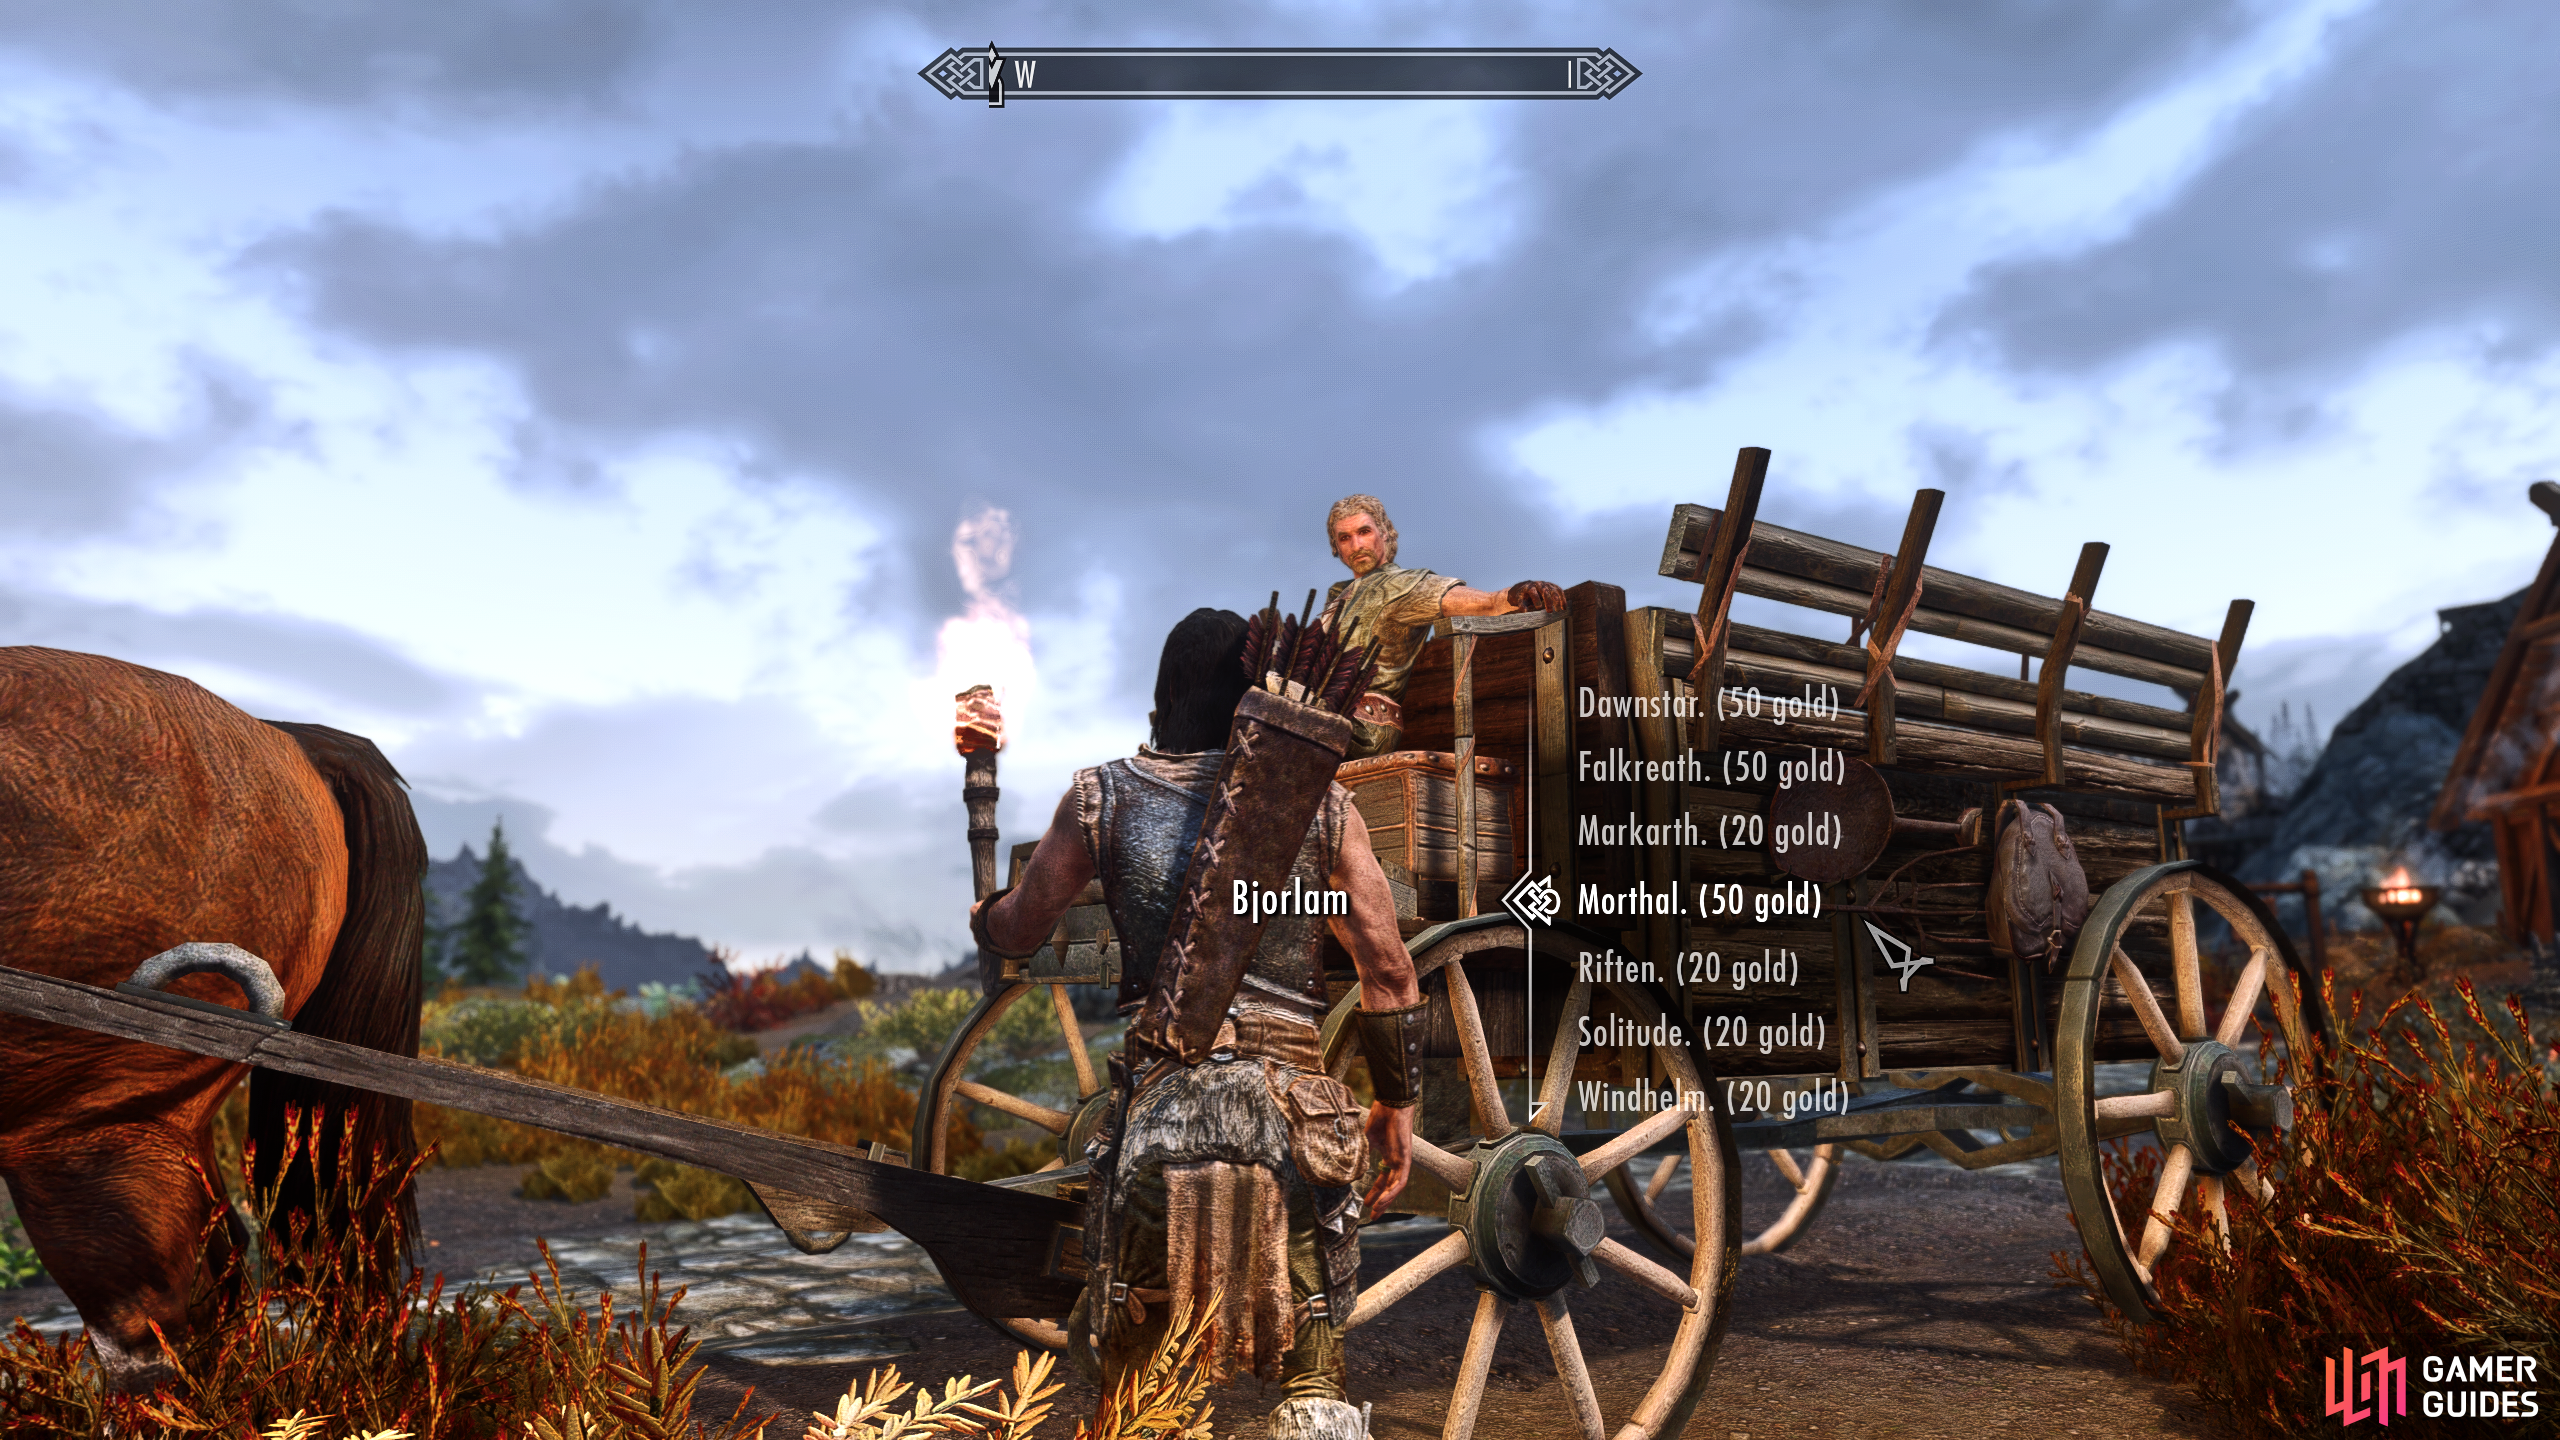 If you'd rather get to Ustengrav without walking so much, take the carriage from Whiterun stables to Morthal.